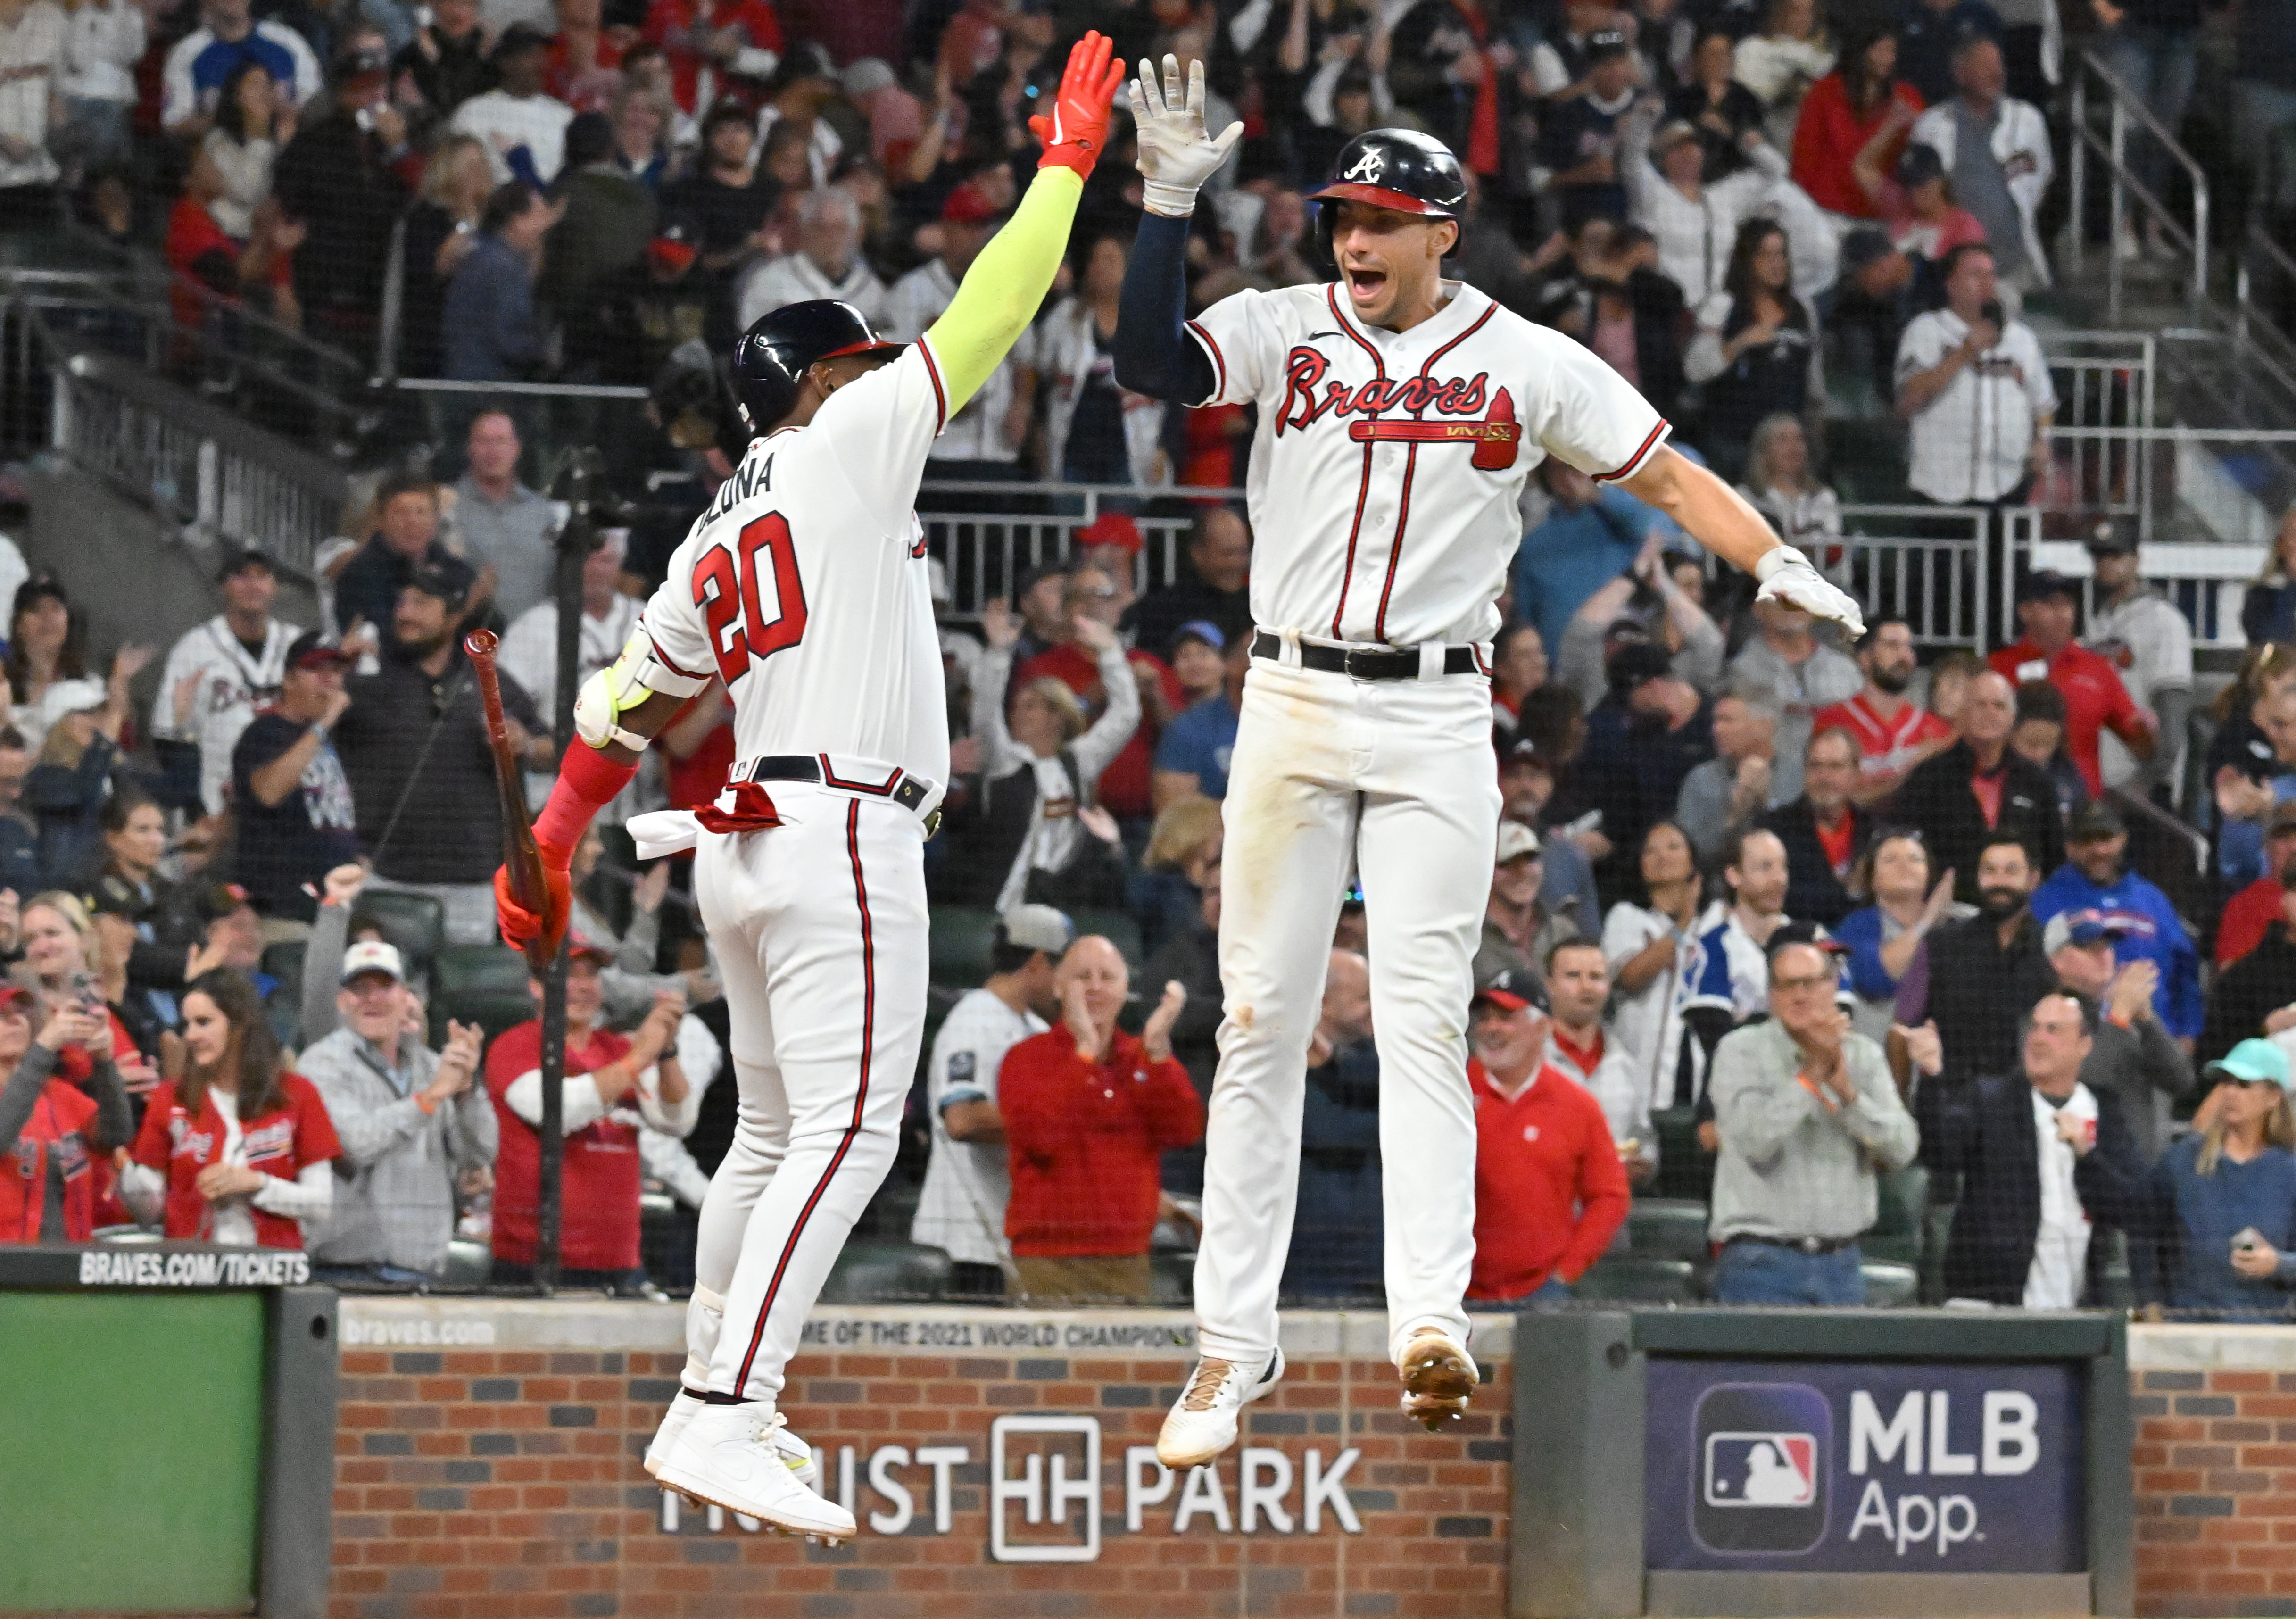 Braves Sweep Mets, Closing in on NL East Title - The New York Times